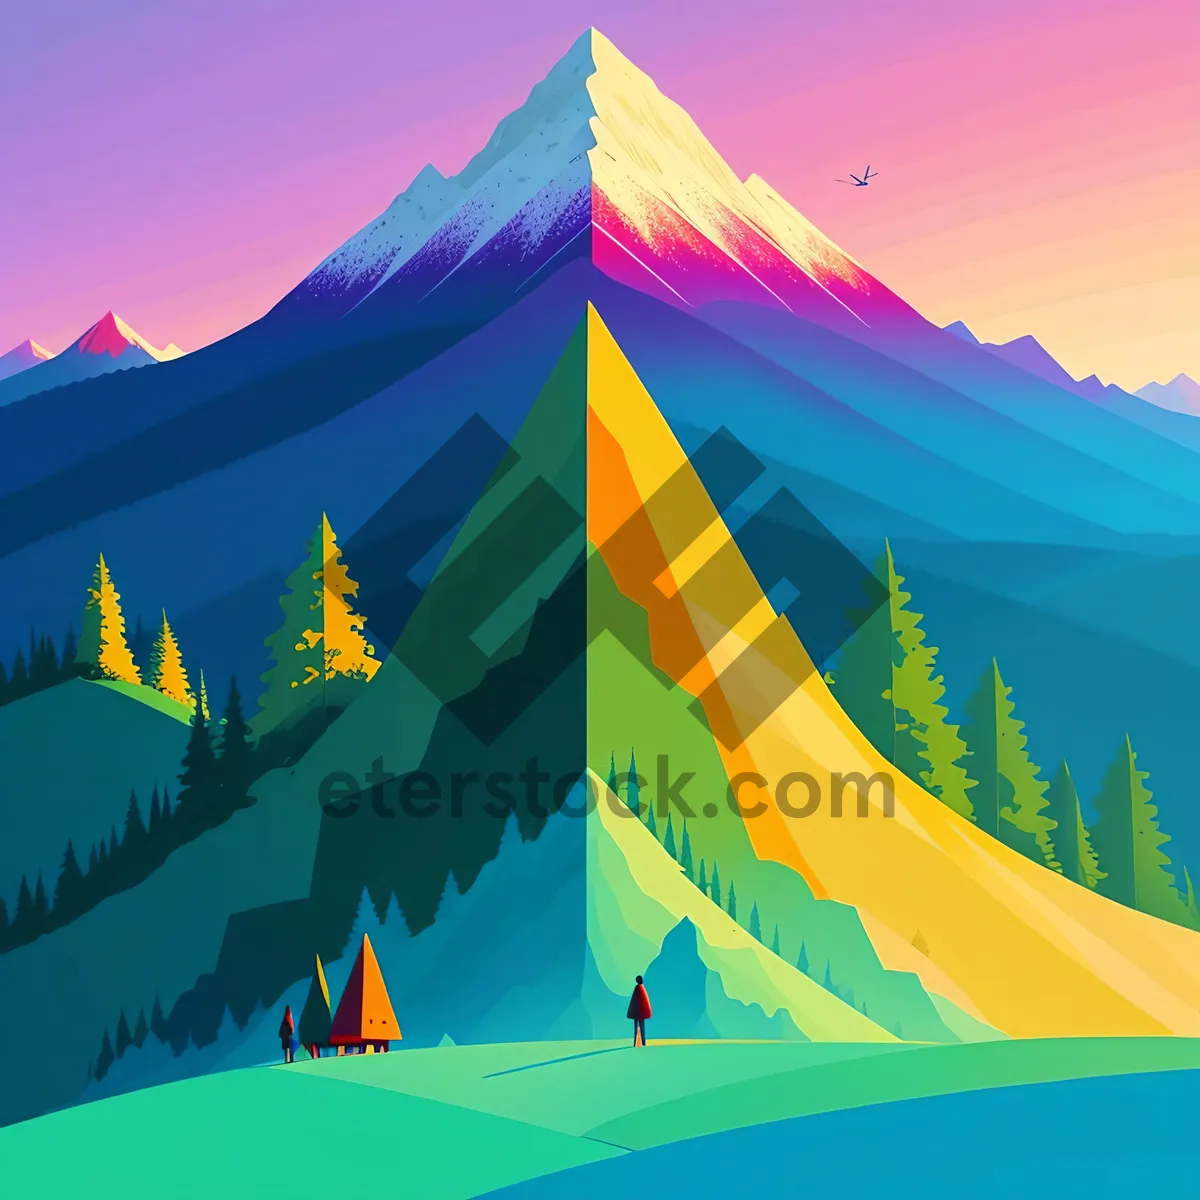 Picture of Moonlit Pyramid Design on Canvas Tent Decoration